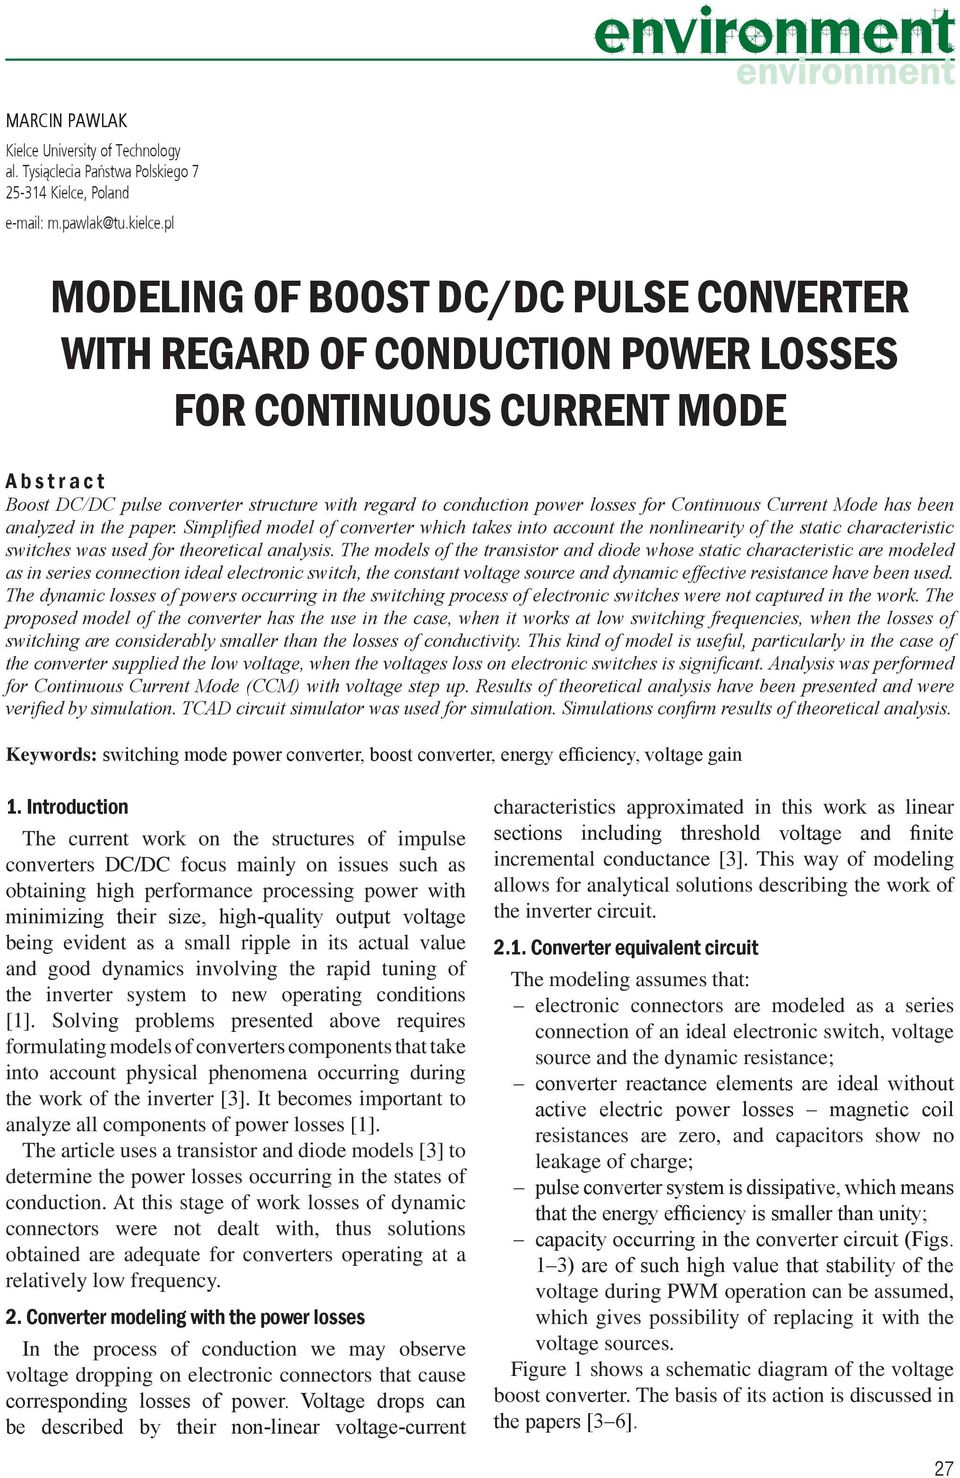 Current Mode has been analyzed in the paper. Simplified model of converter which takes into account the nonlinearity of the static characteristic switches was used for theoretical analysis.